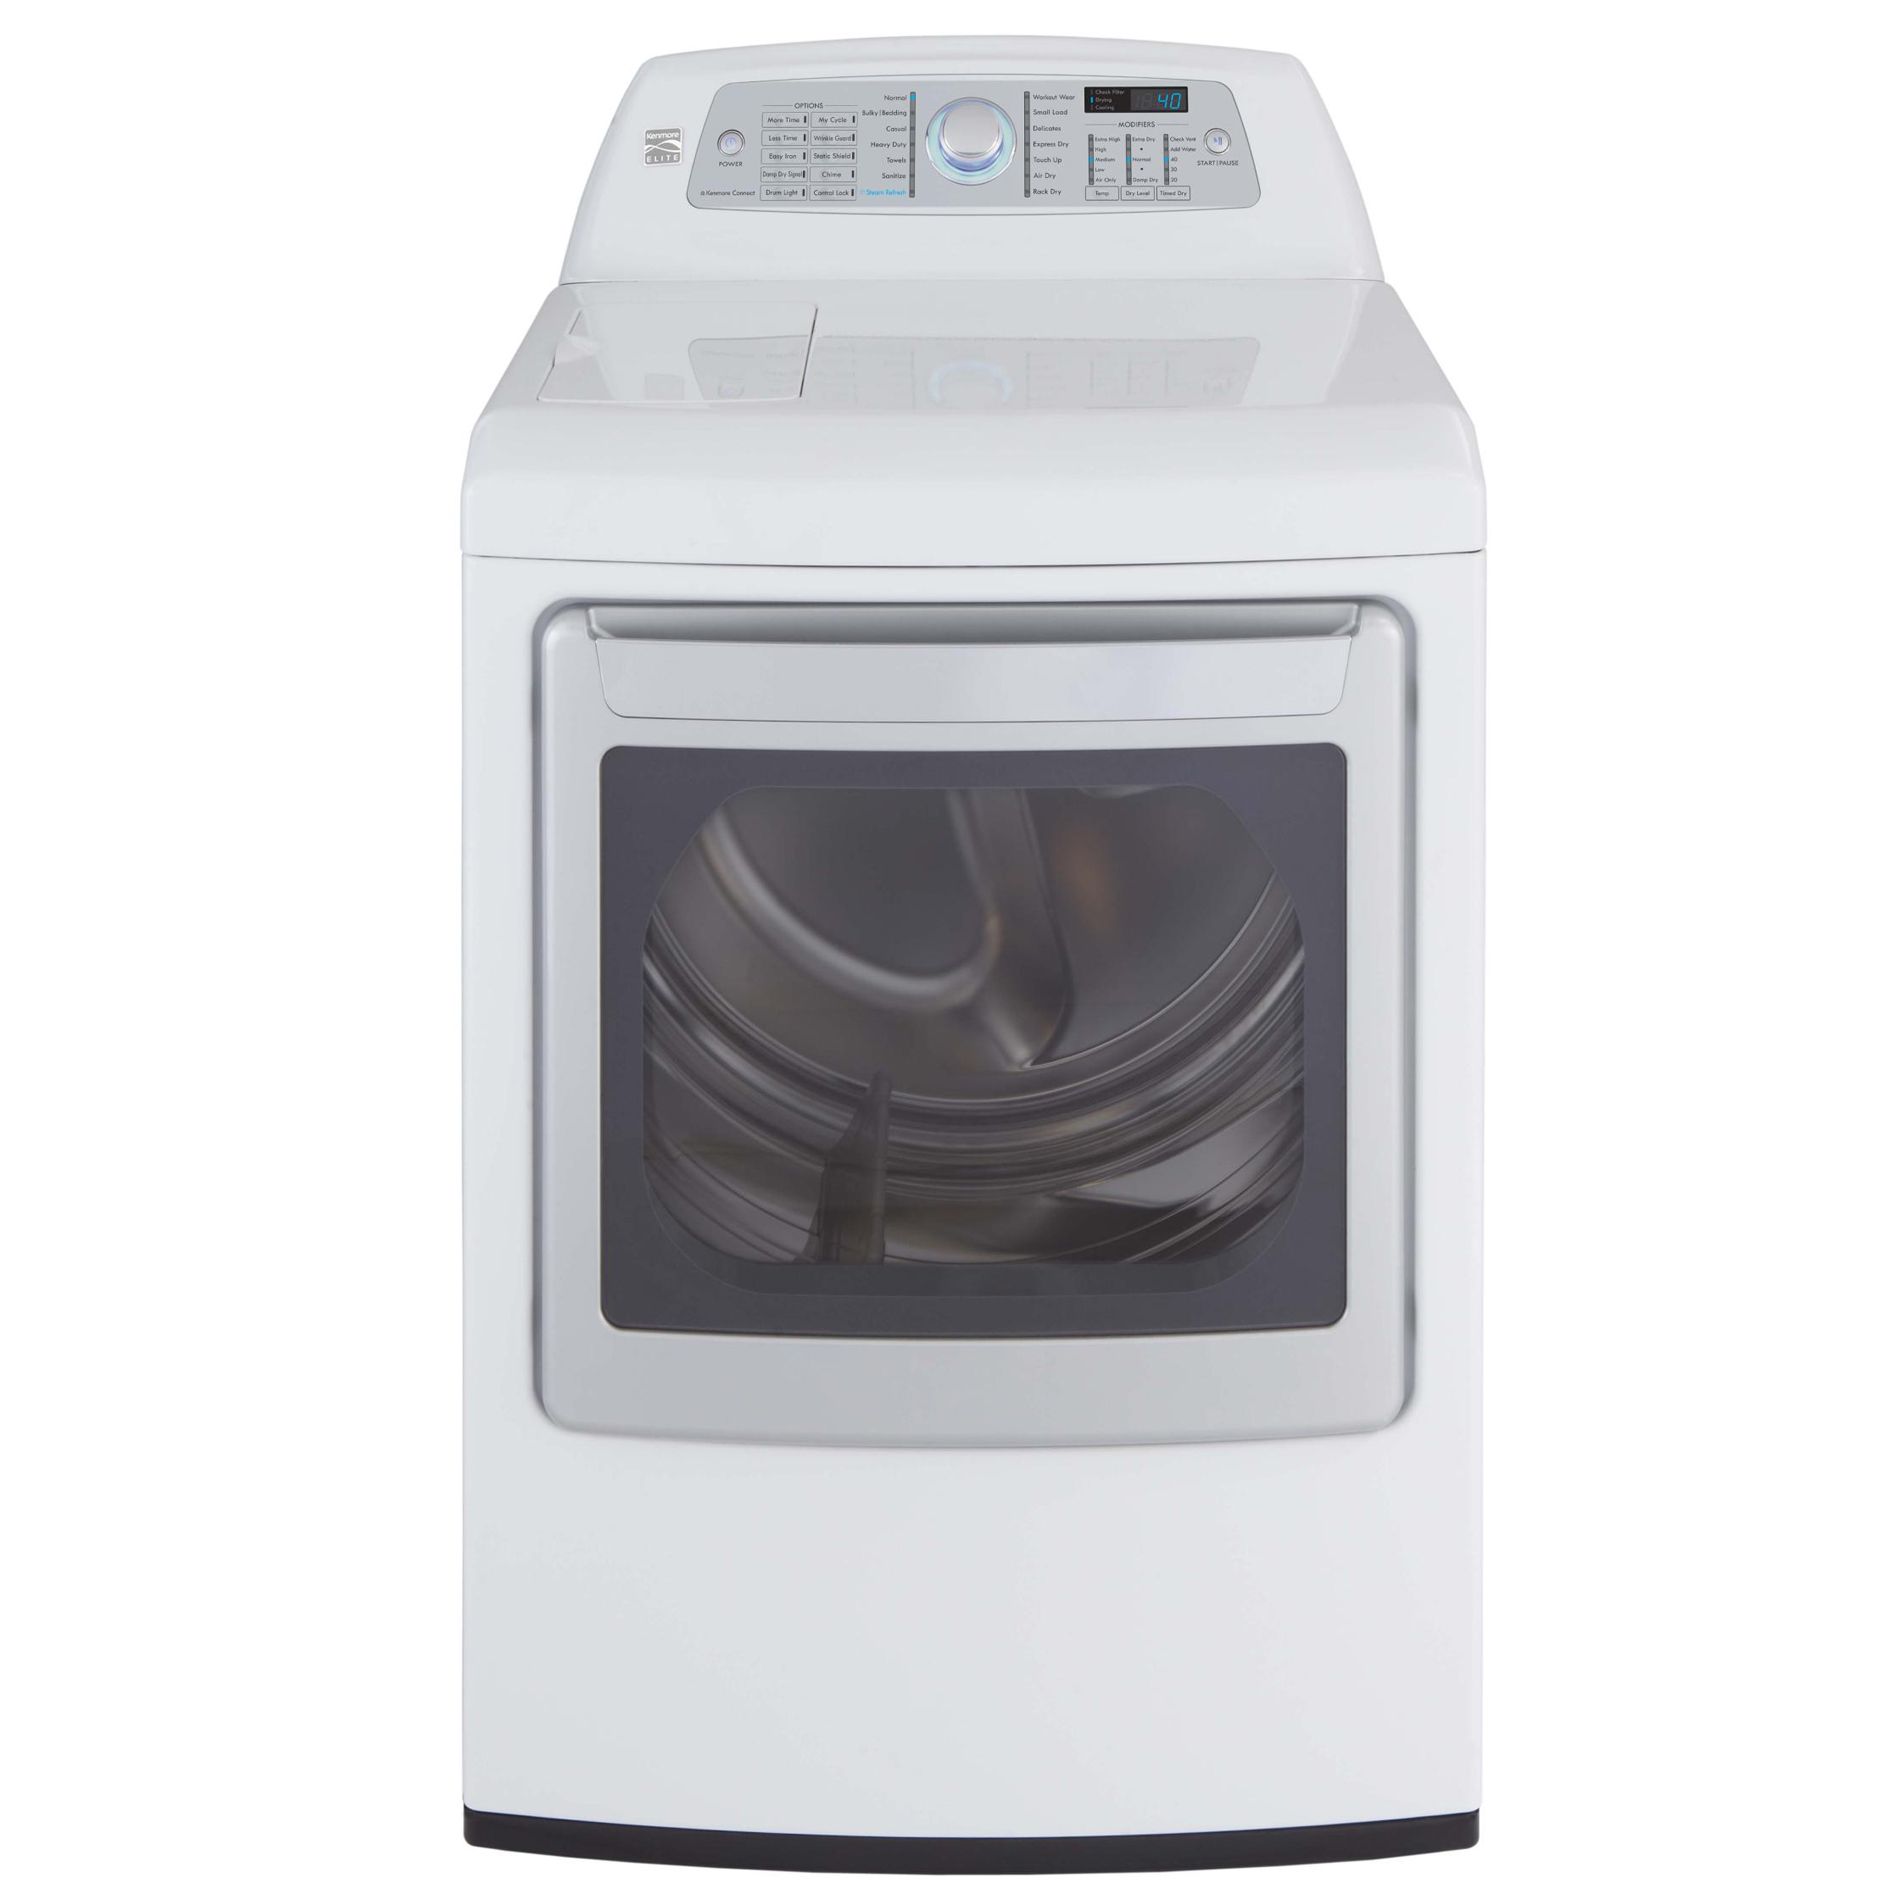 Kenmore 7.6 cu. ft. Electric Dryer: Clean and Dry at Sears